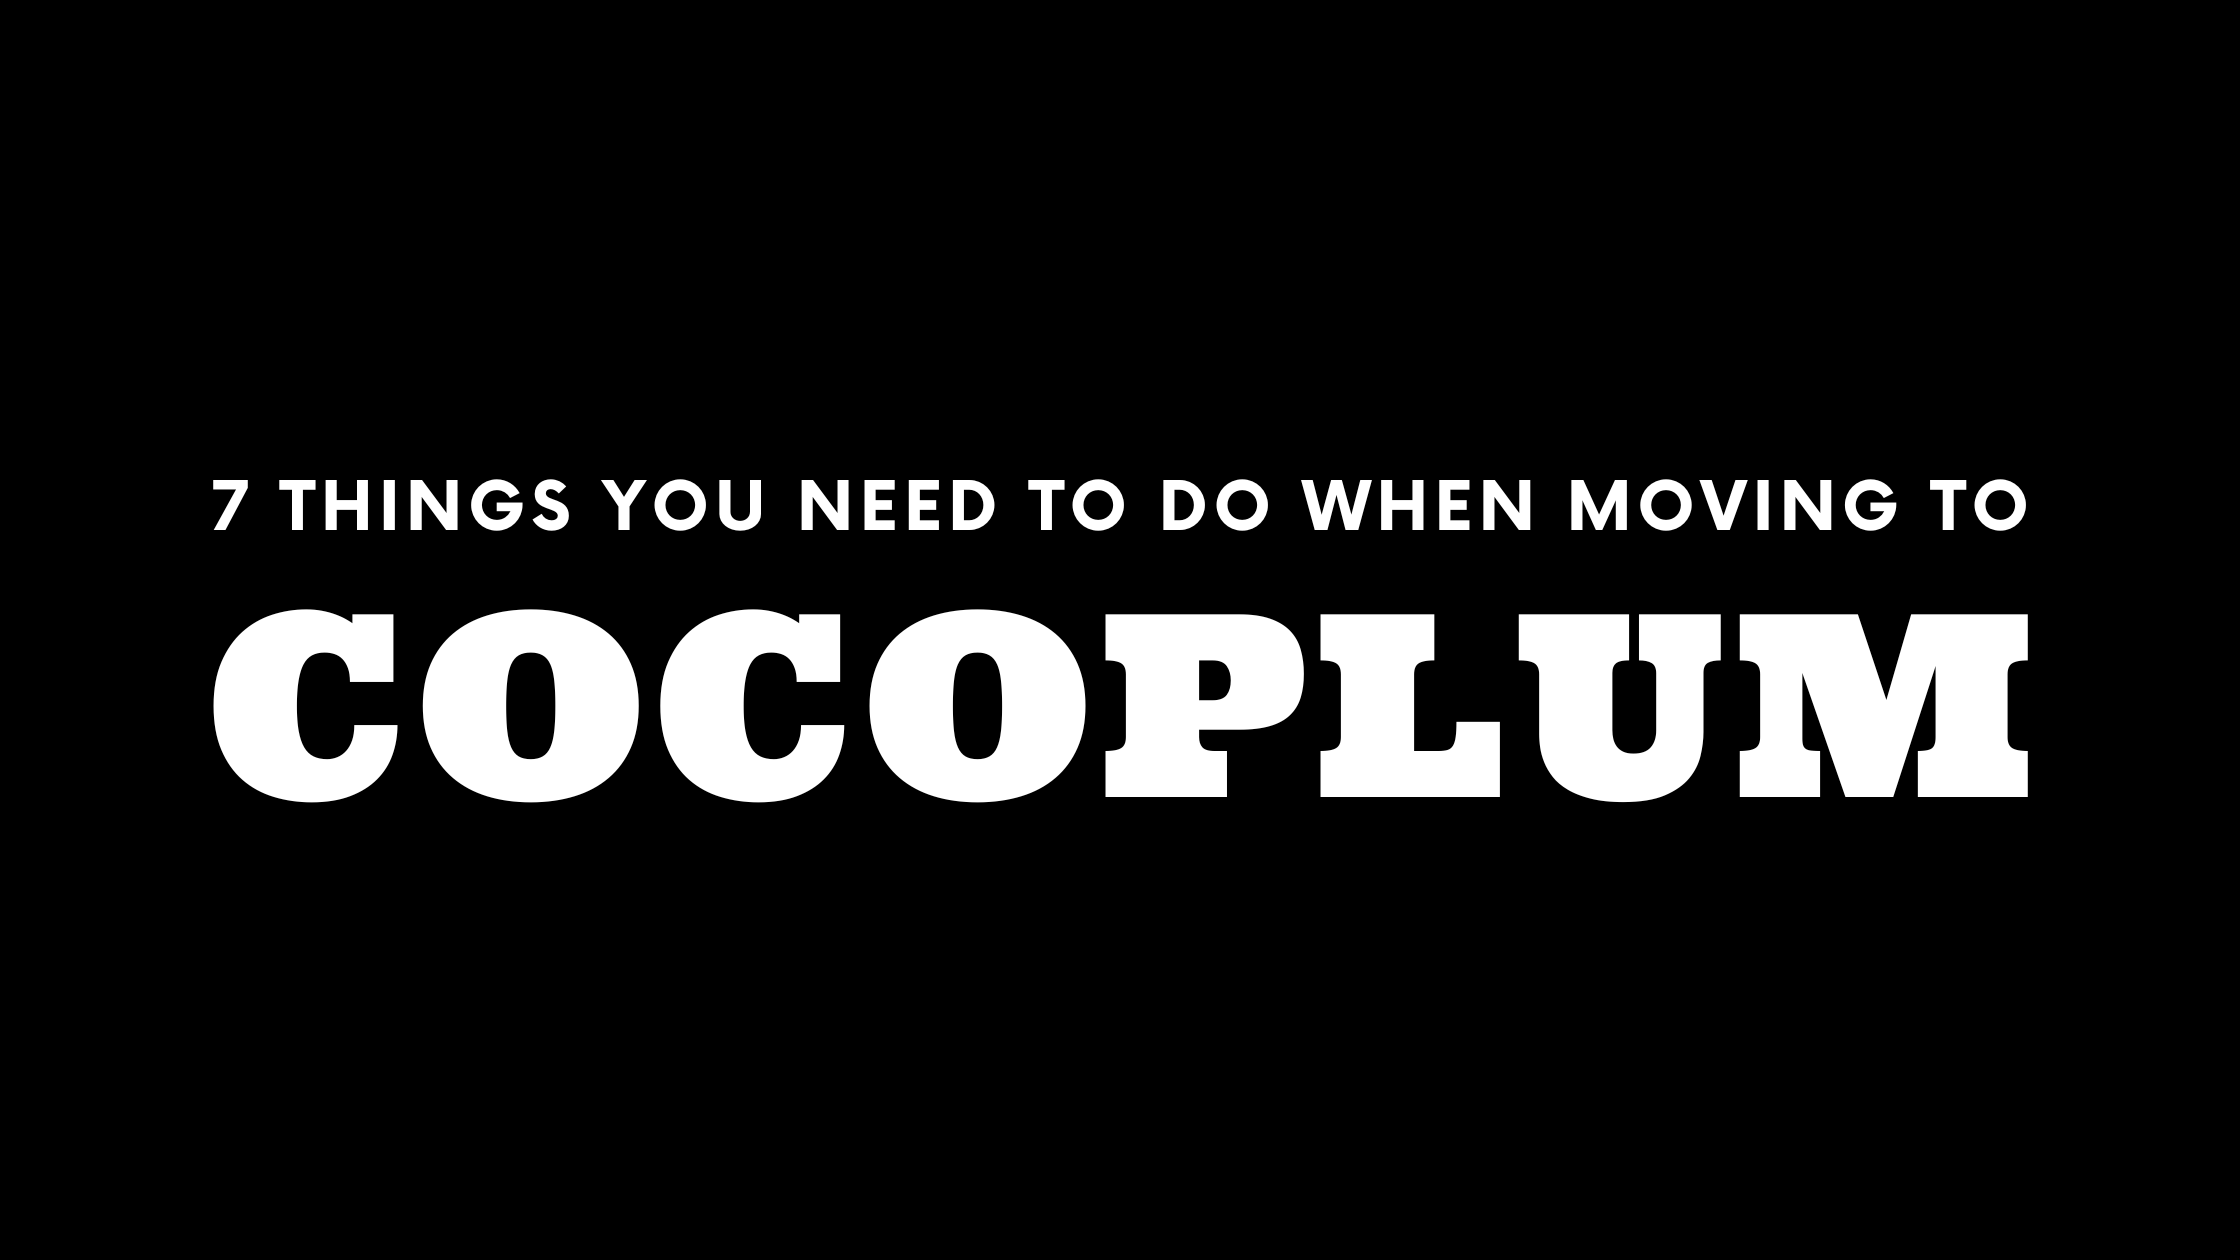 Moving to Cocoplum? 7 Things You Need To Do Immediately!